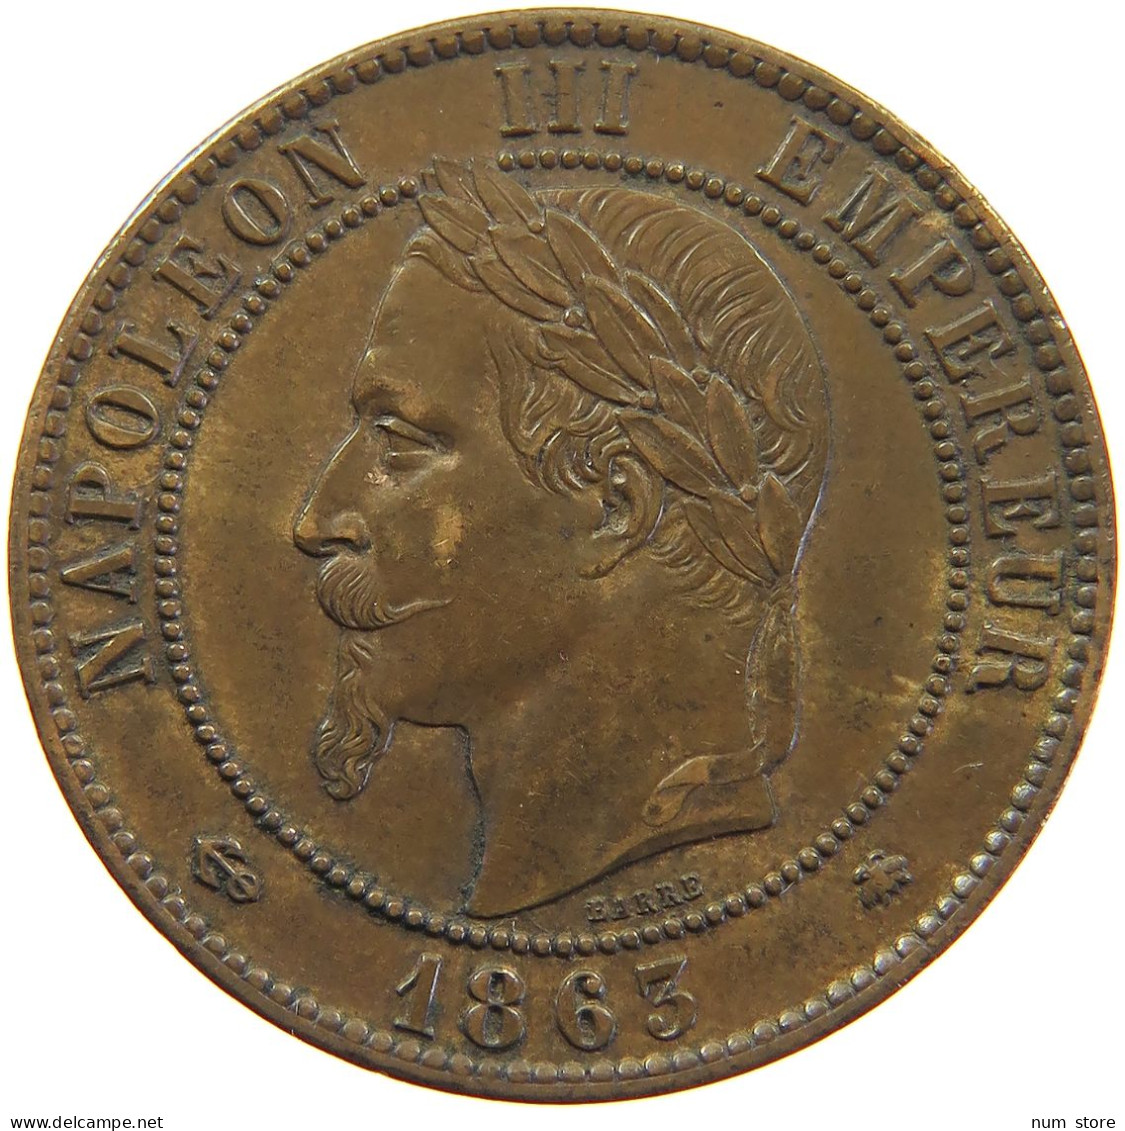 FRANCE 10 CENTIMES 1863 Napoleon III. (1852-1870) #t016 0127 - 10 Centimes